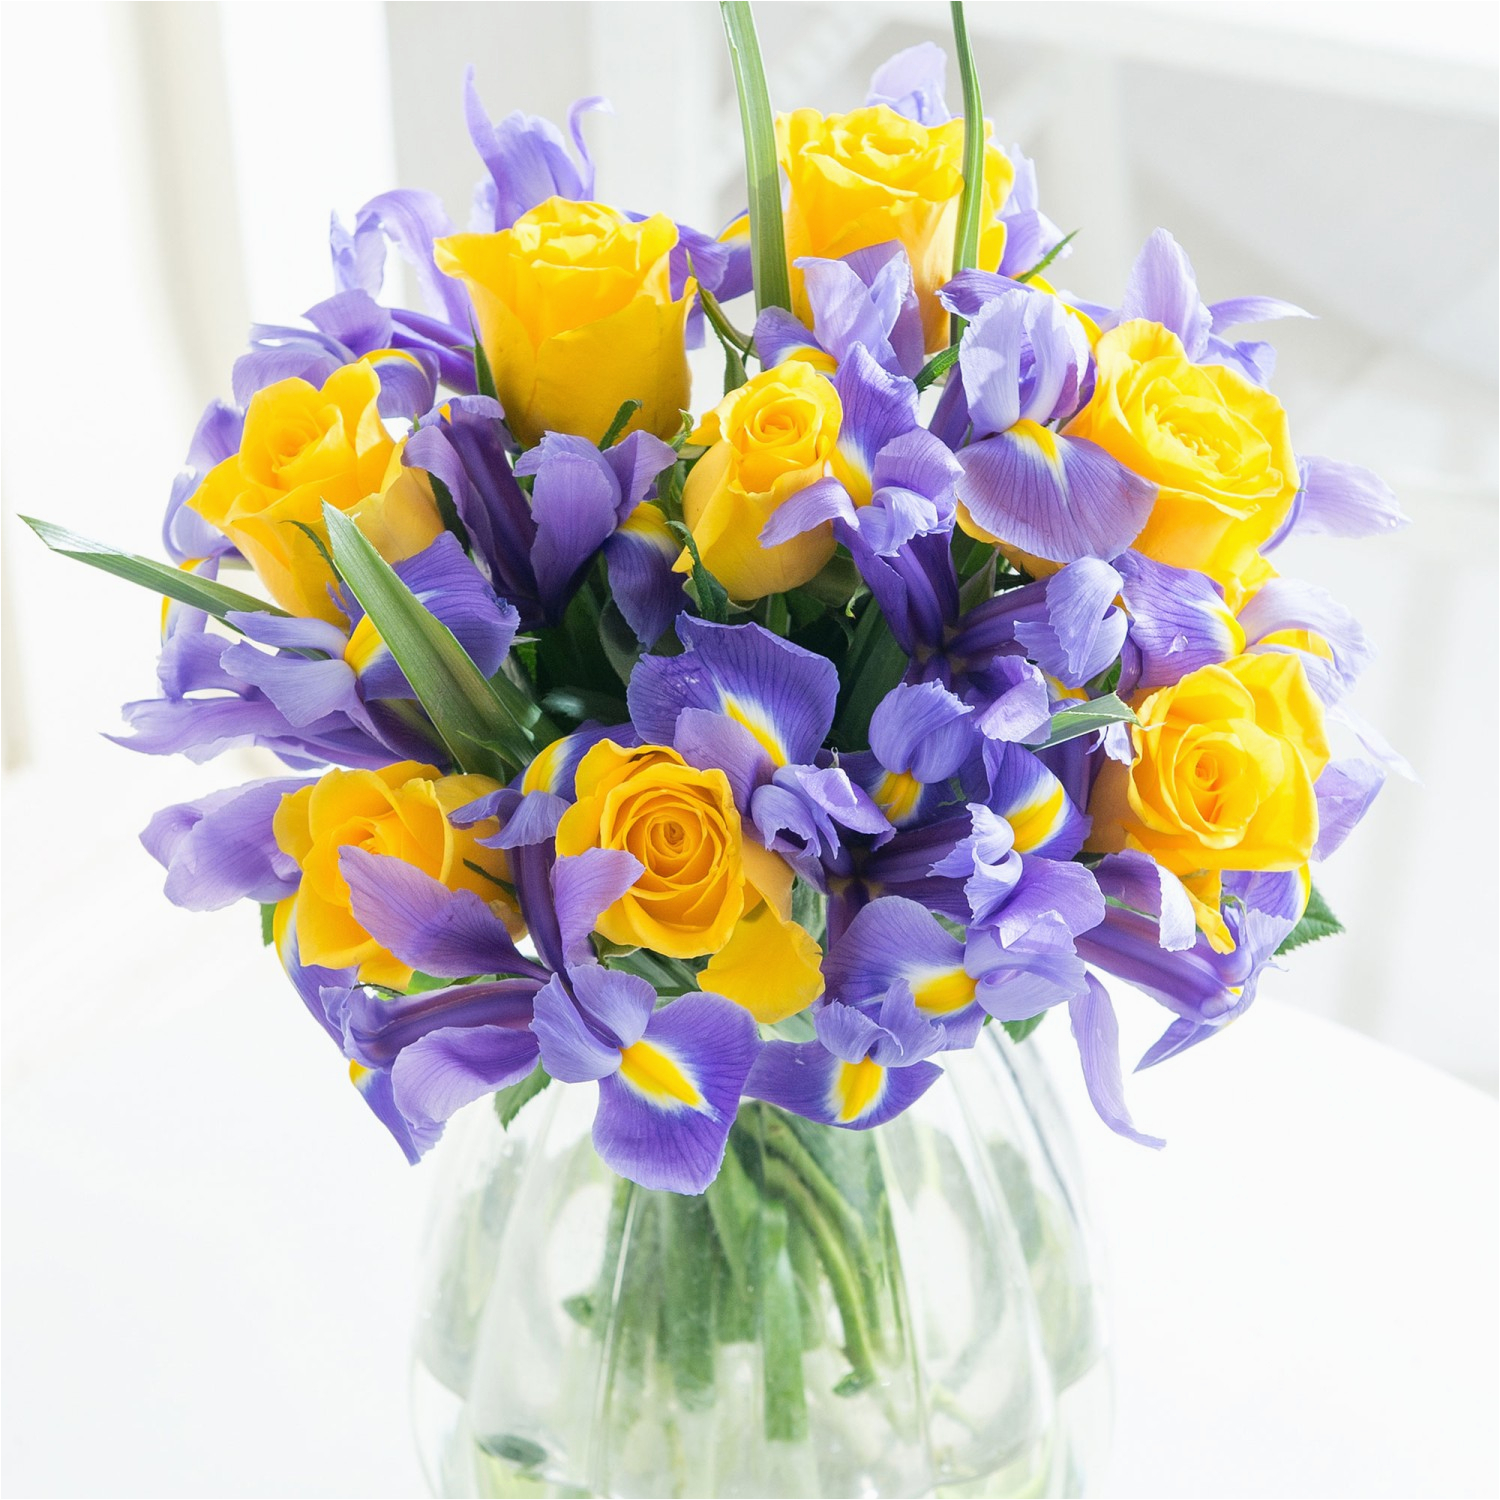 send flowers online same day flower delivery by petals